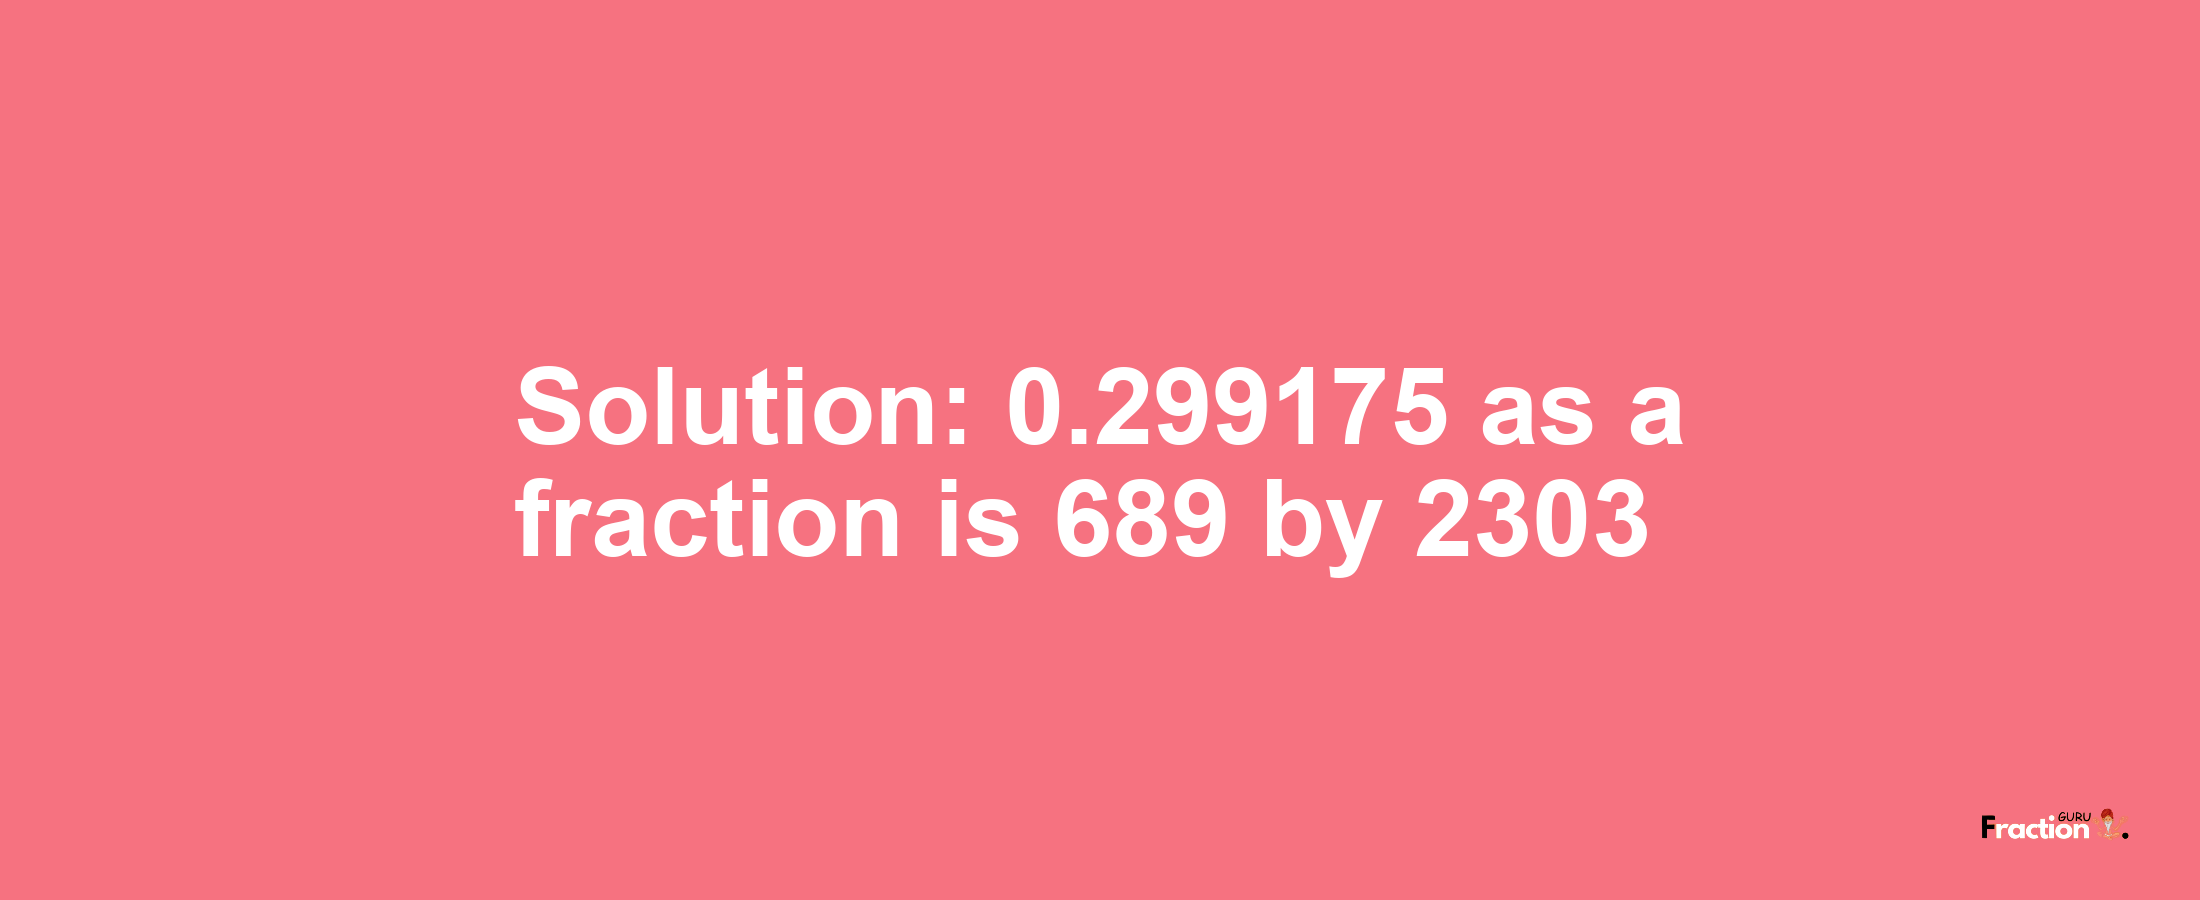 Solution:0.299175 as a fraction is 689/2303